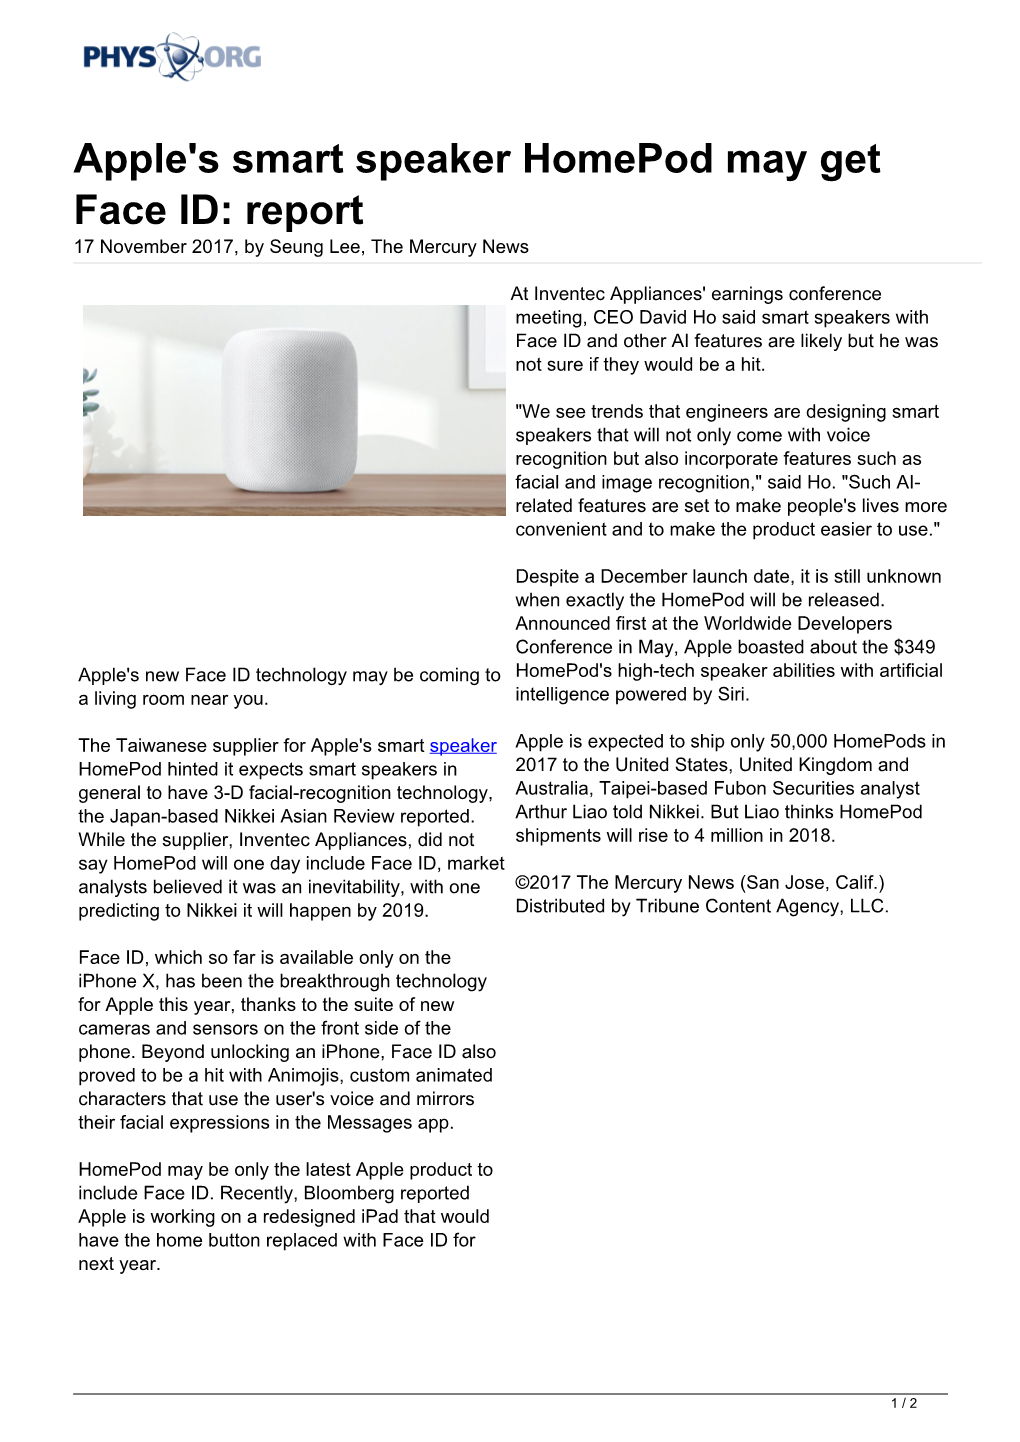 Apple's Smart Speaker Homepod May Get Face ID: Report 17 November 2017, by Seung Lee, the Mercury News